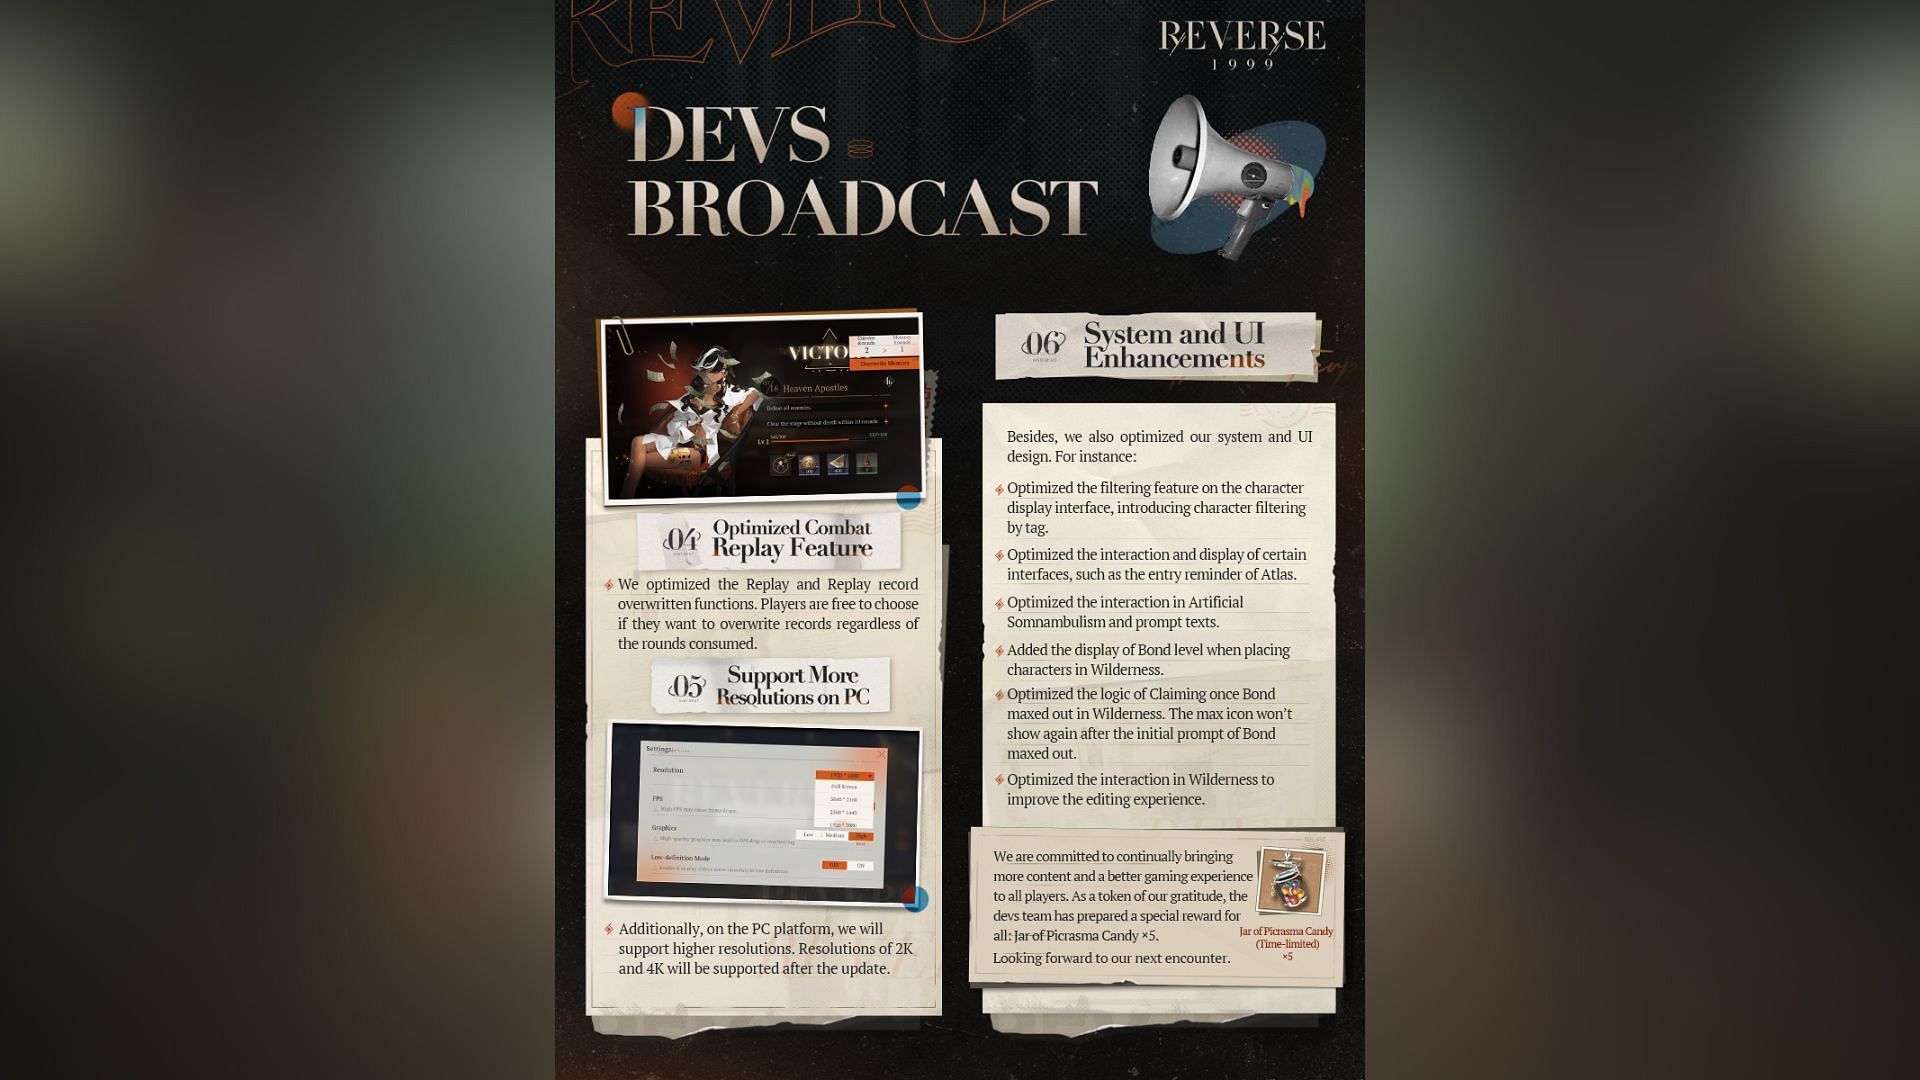 An image of Devs Broadcast posted by Bluepoch on X. (Image via Bluepoch)